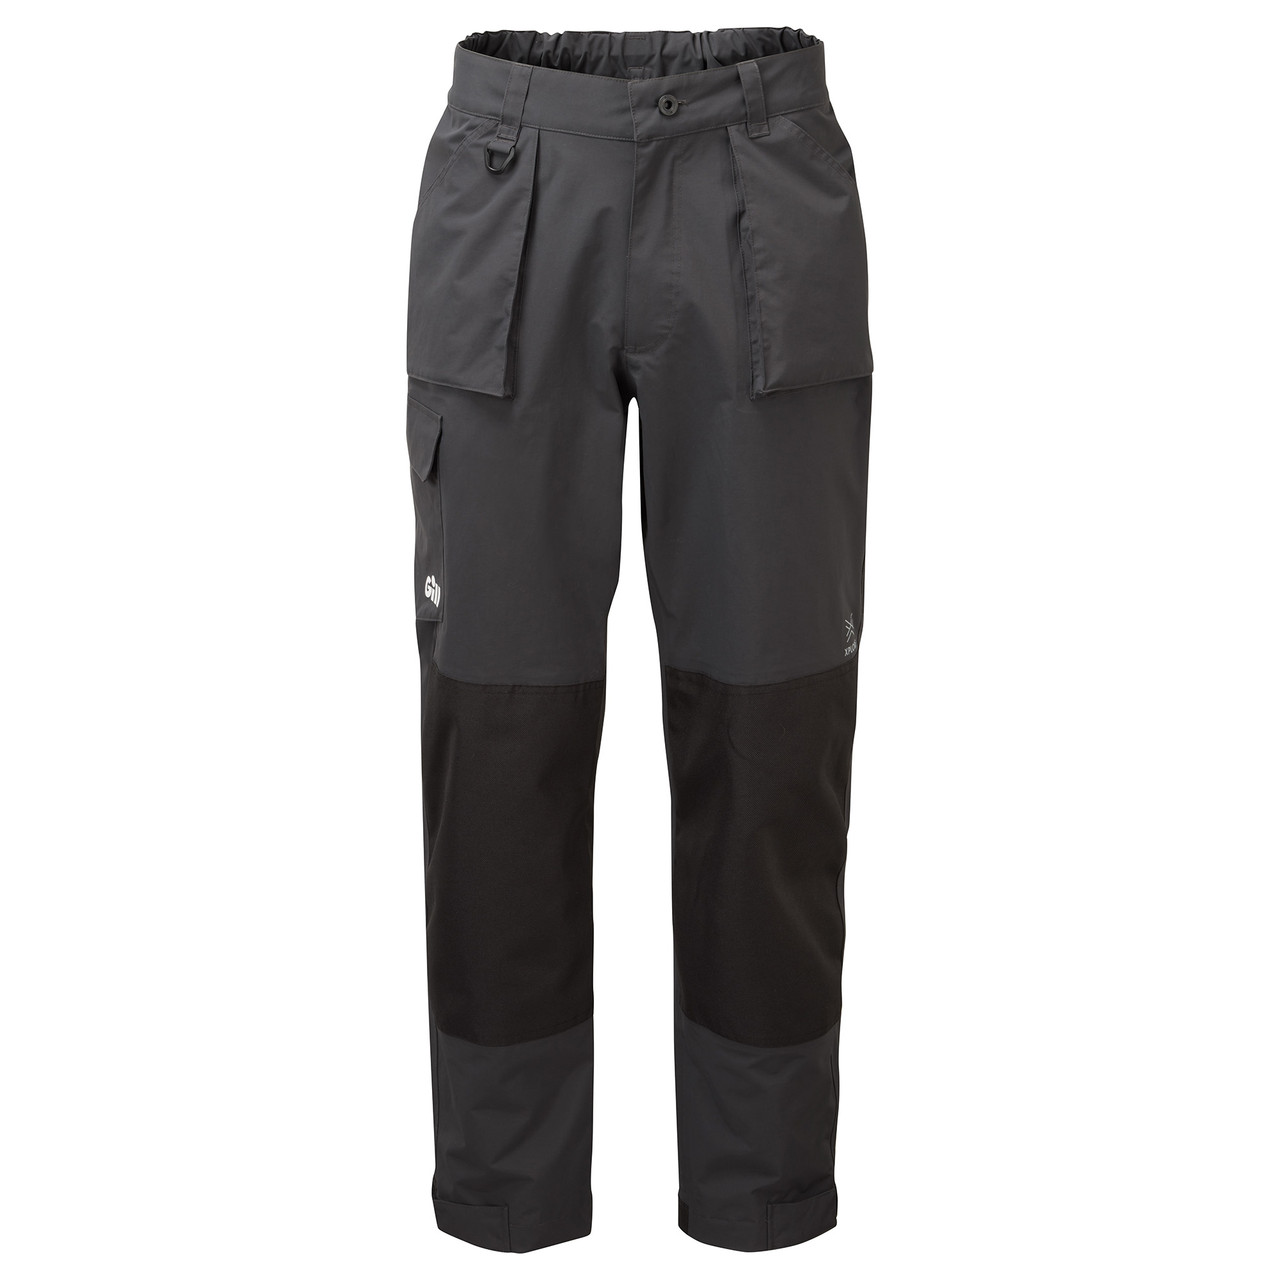 Gill Race Sailing Trouser in Graphite RC025 - Sailing - Sailing - Dinghy -  Spray | Watersports Outlet